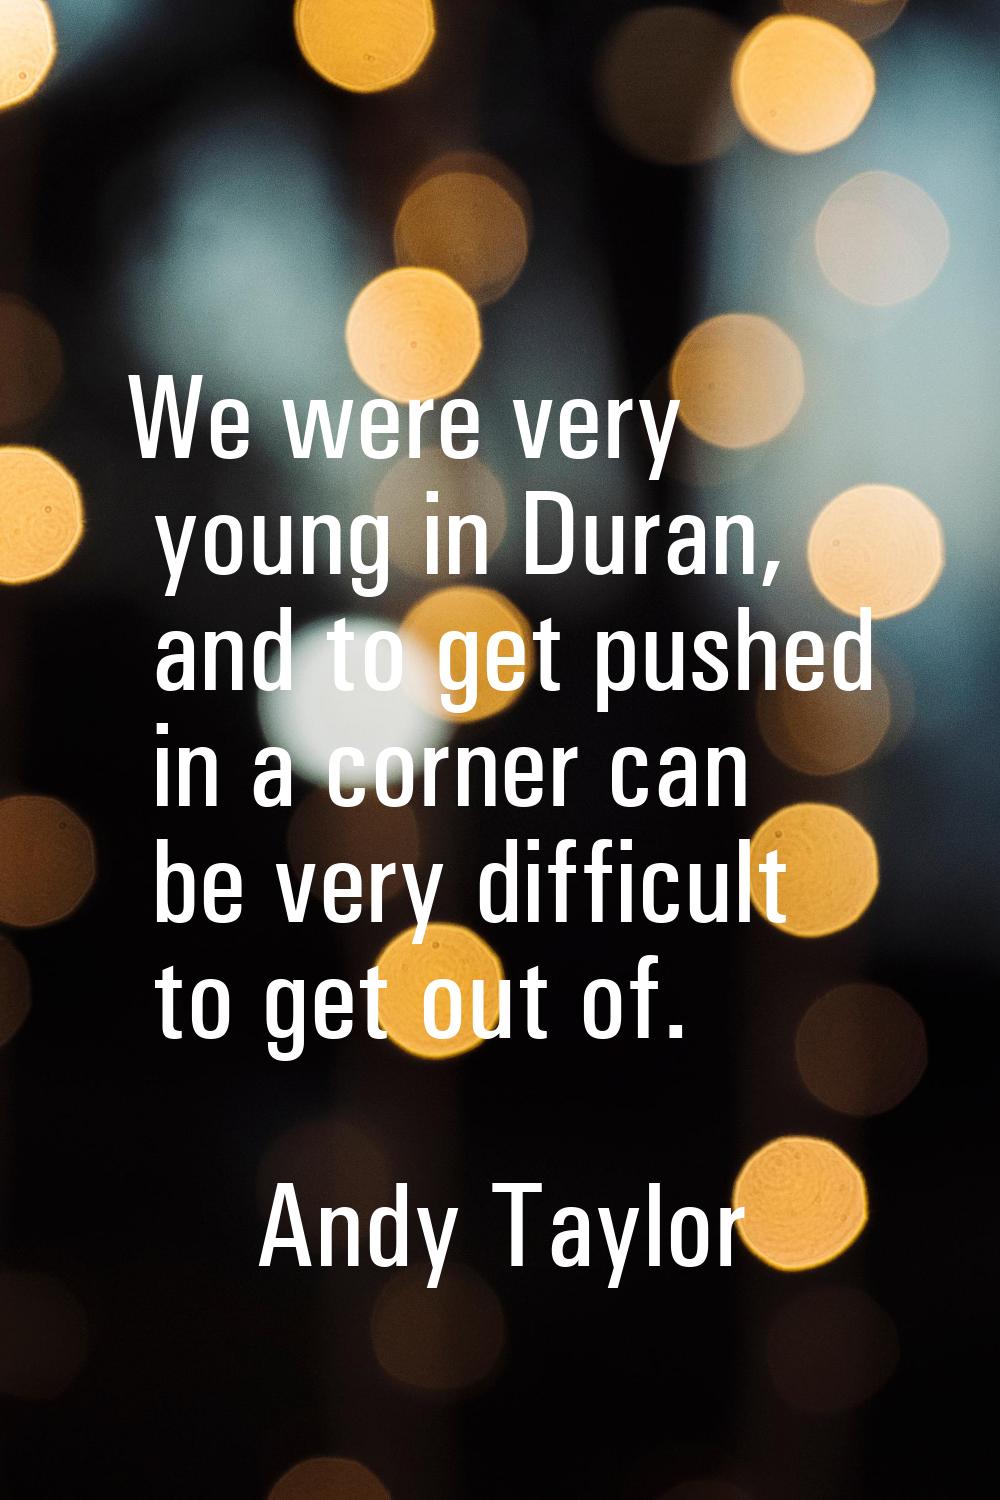 We were very young in Duran, and to get pushed in a corner can be very difficult to get out of.